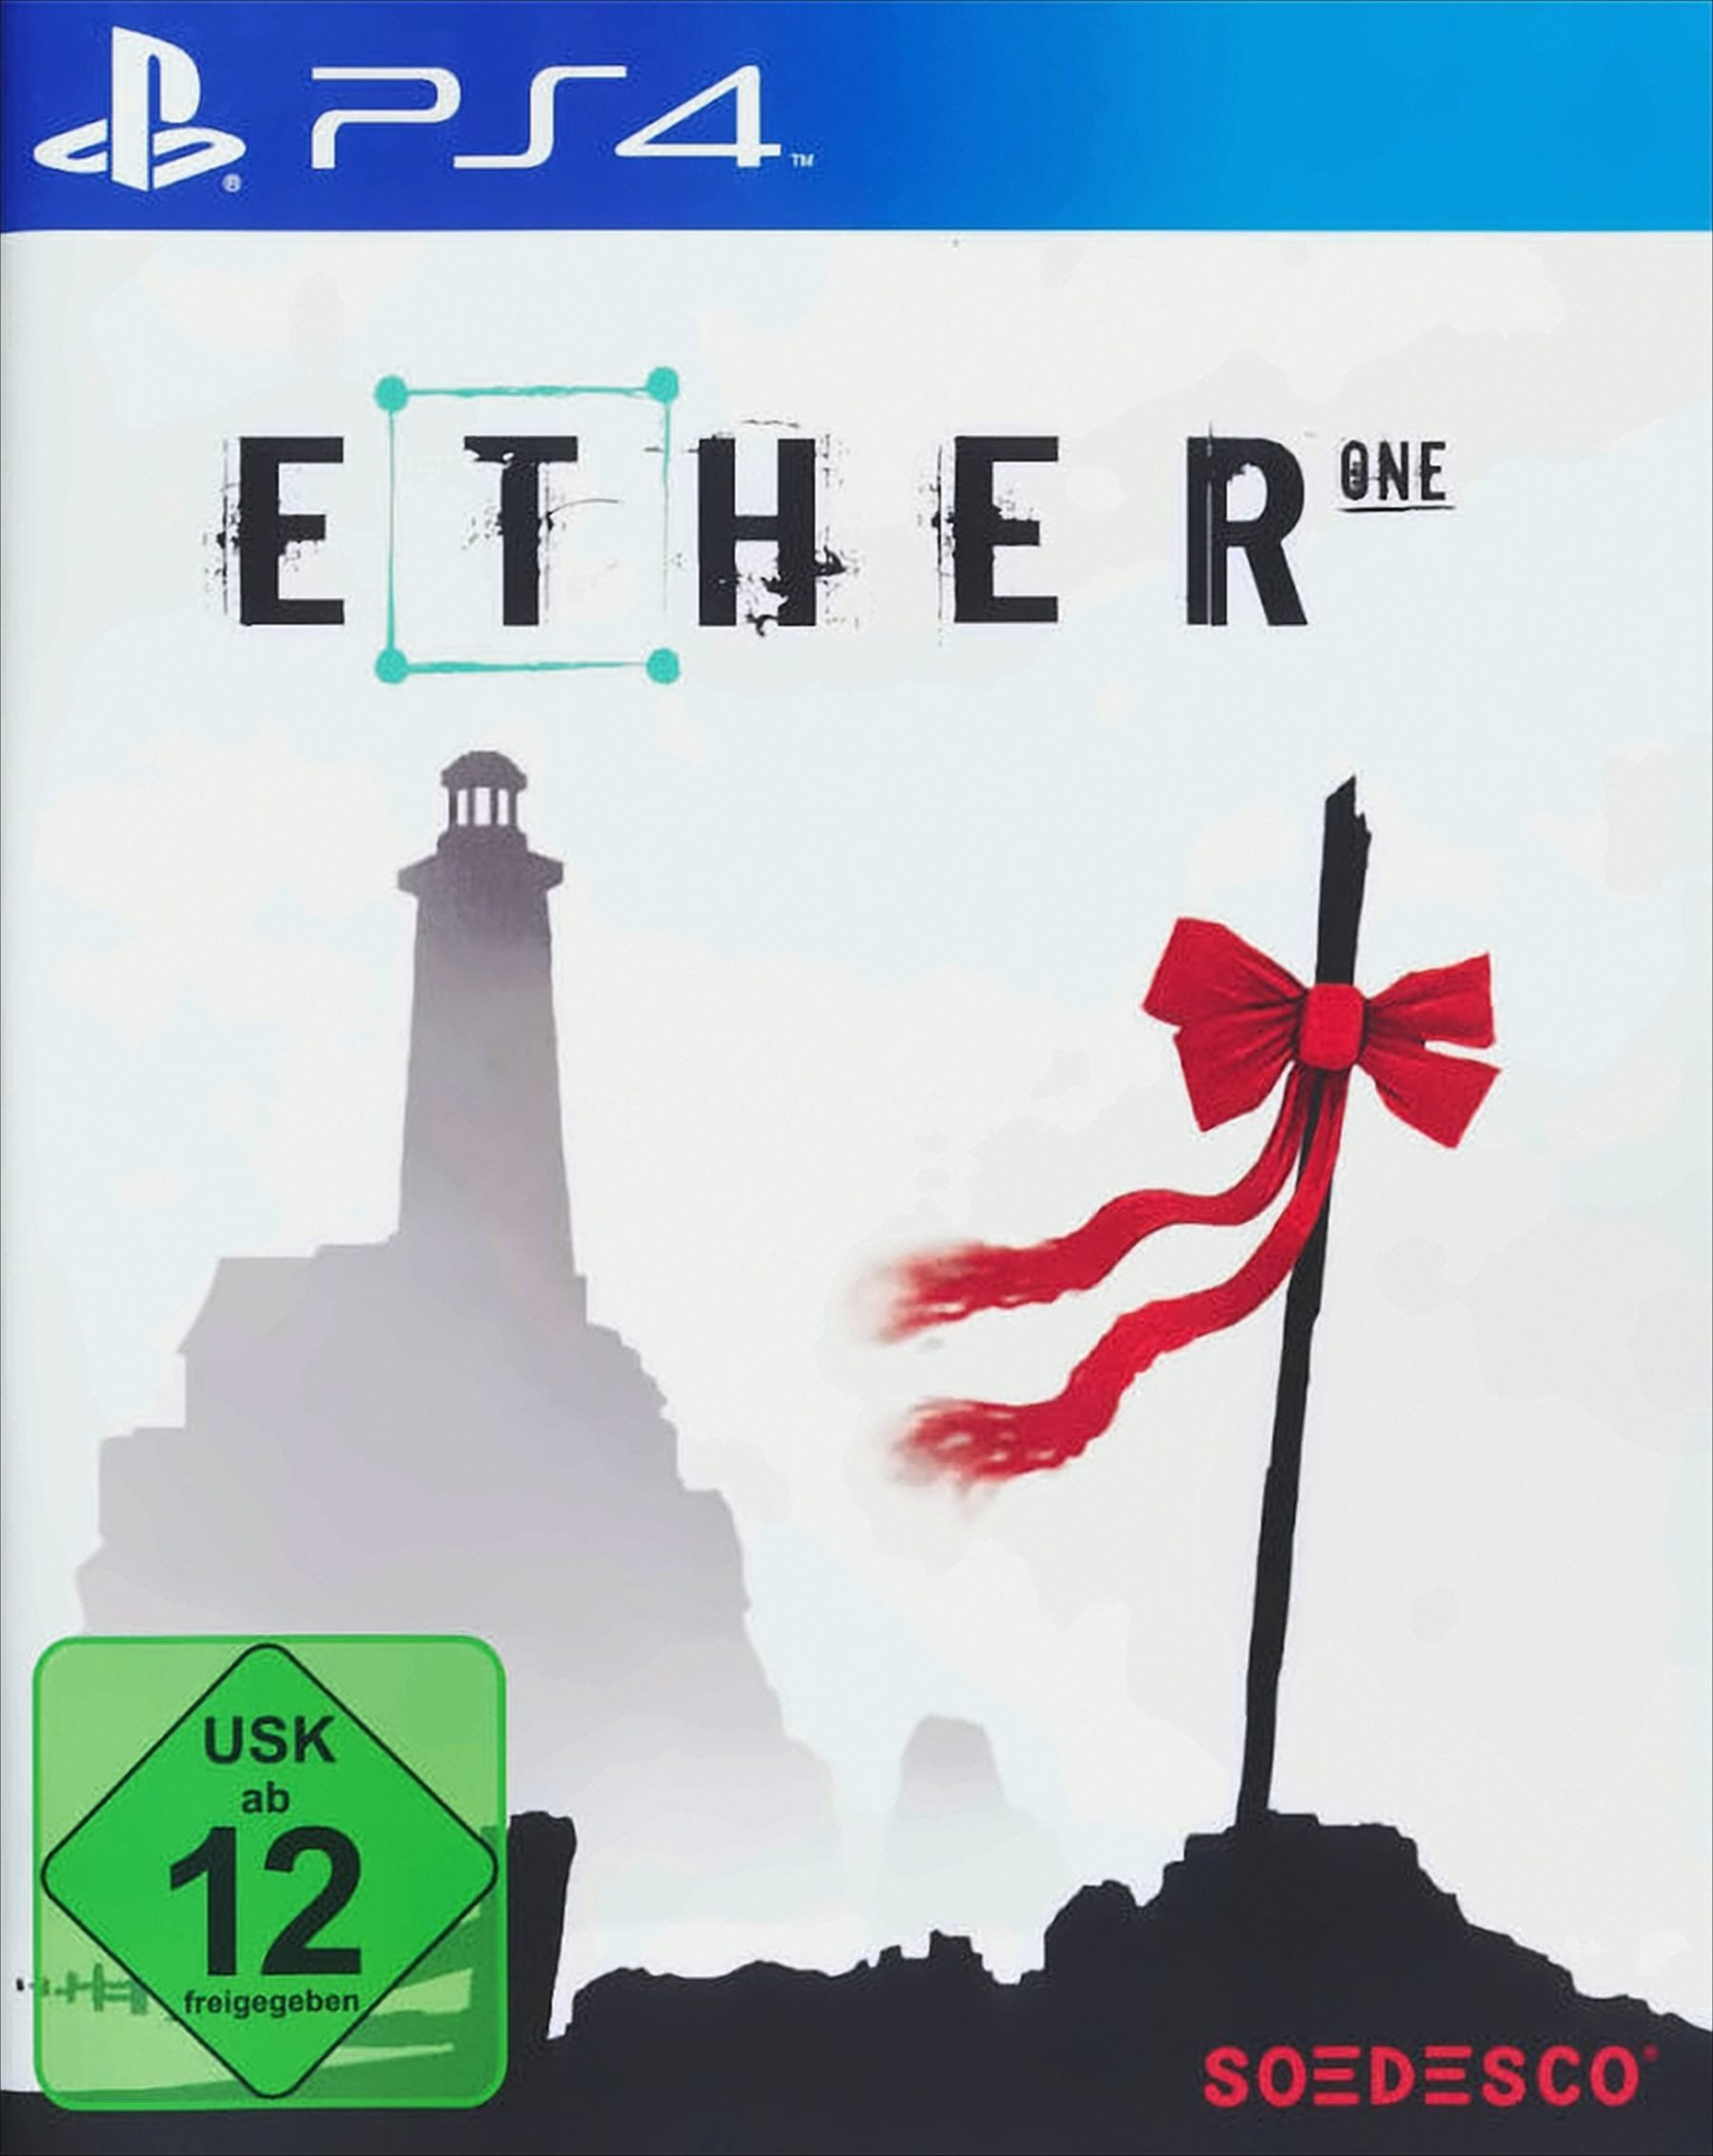 Ether One Playstation 4